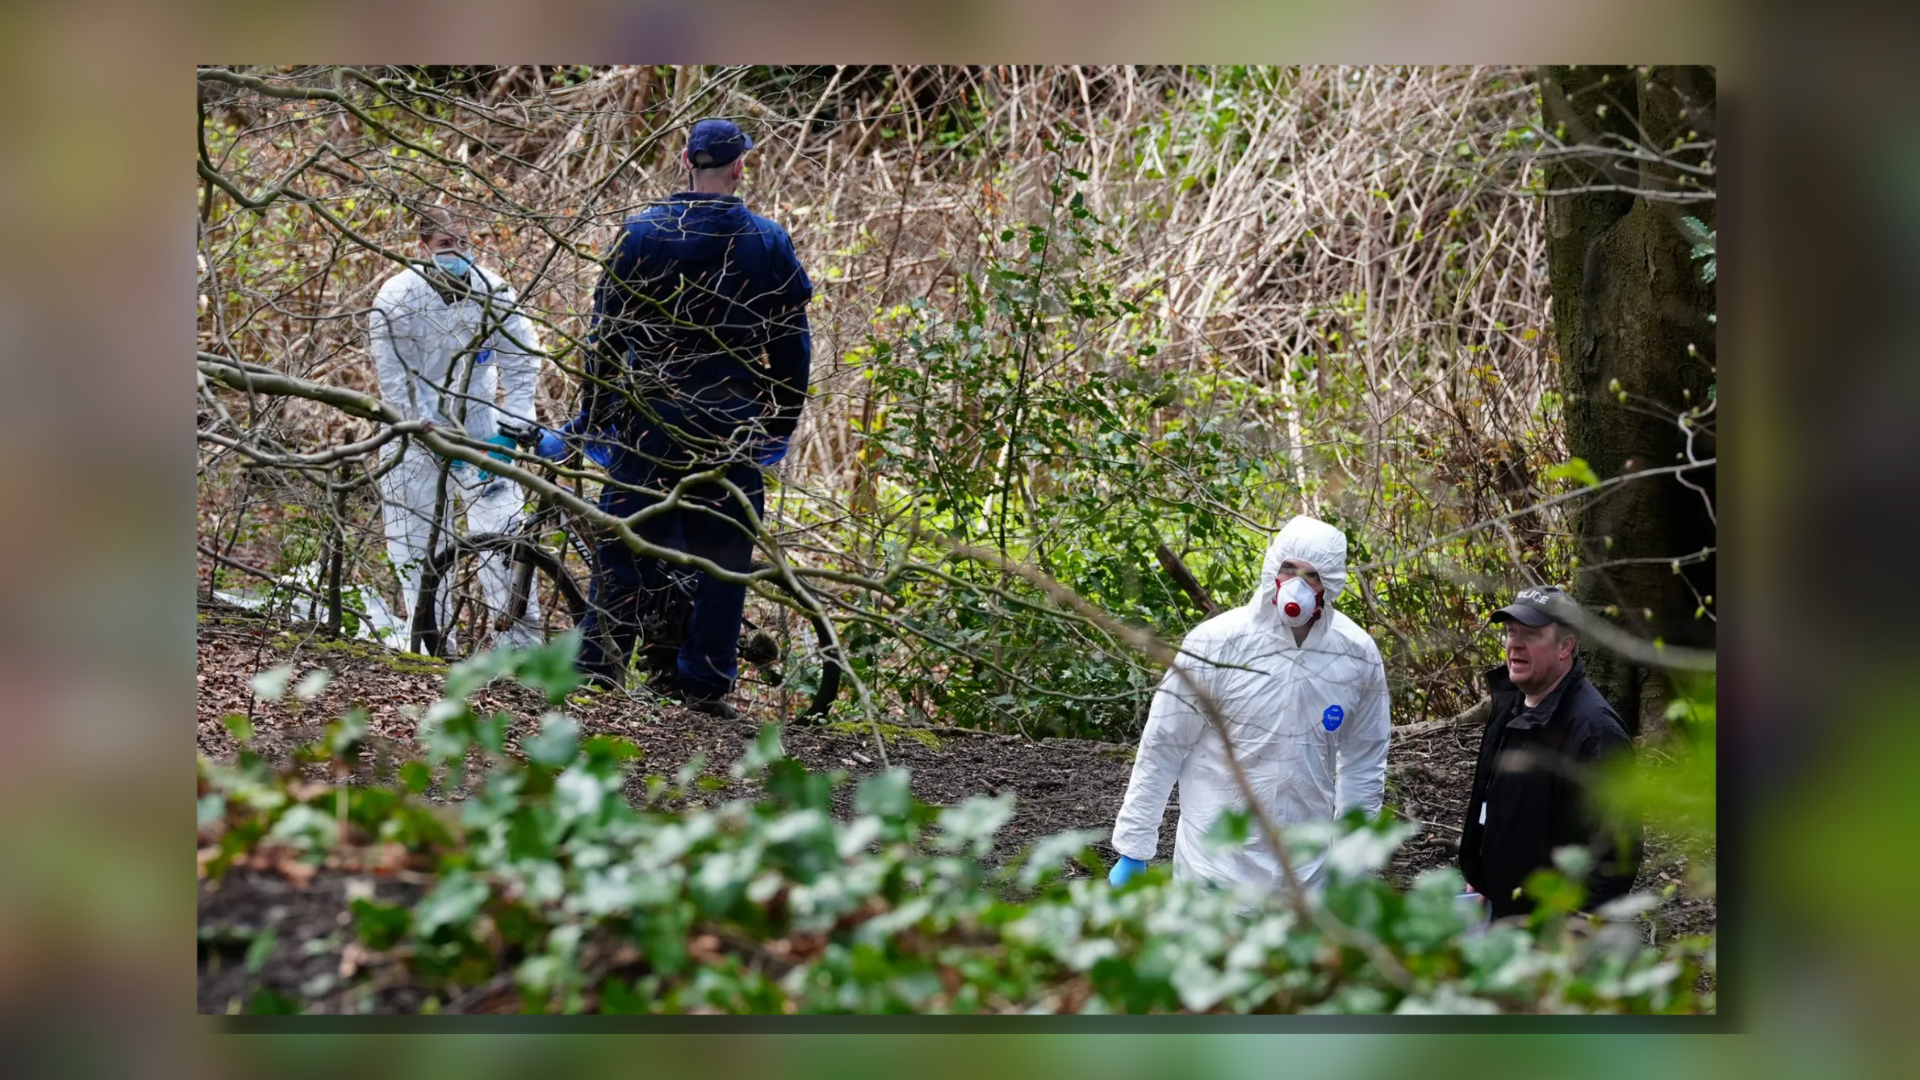 Gruesome Discovery: Headless Human Torso Wrapped In Plastic Uncovered In Salford Woodland, US